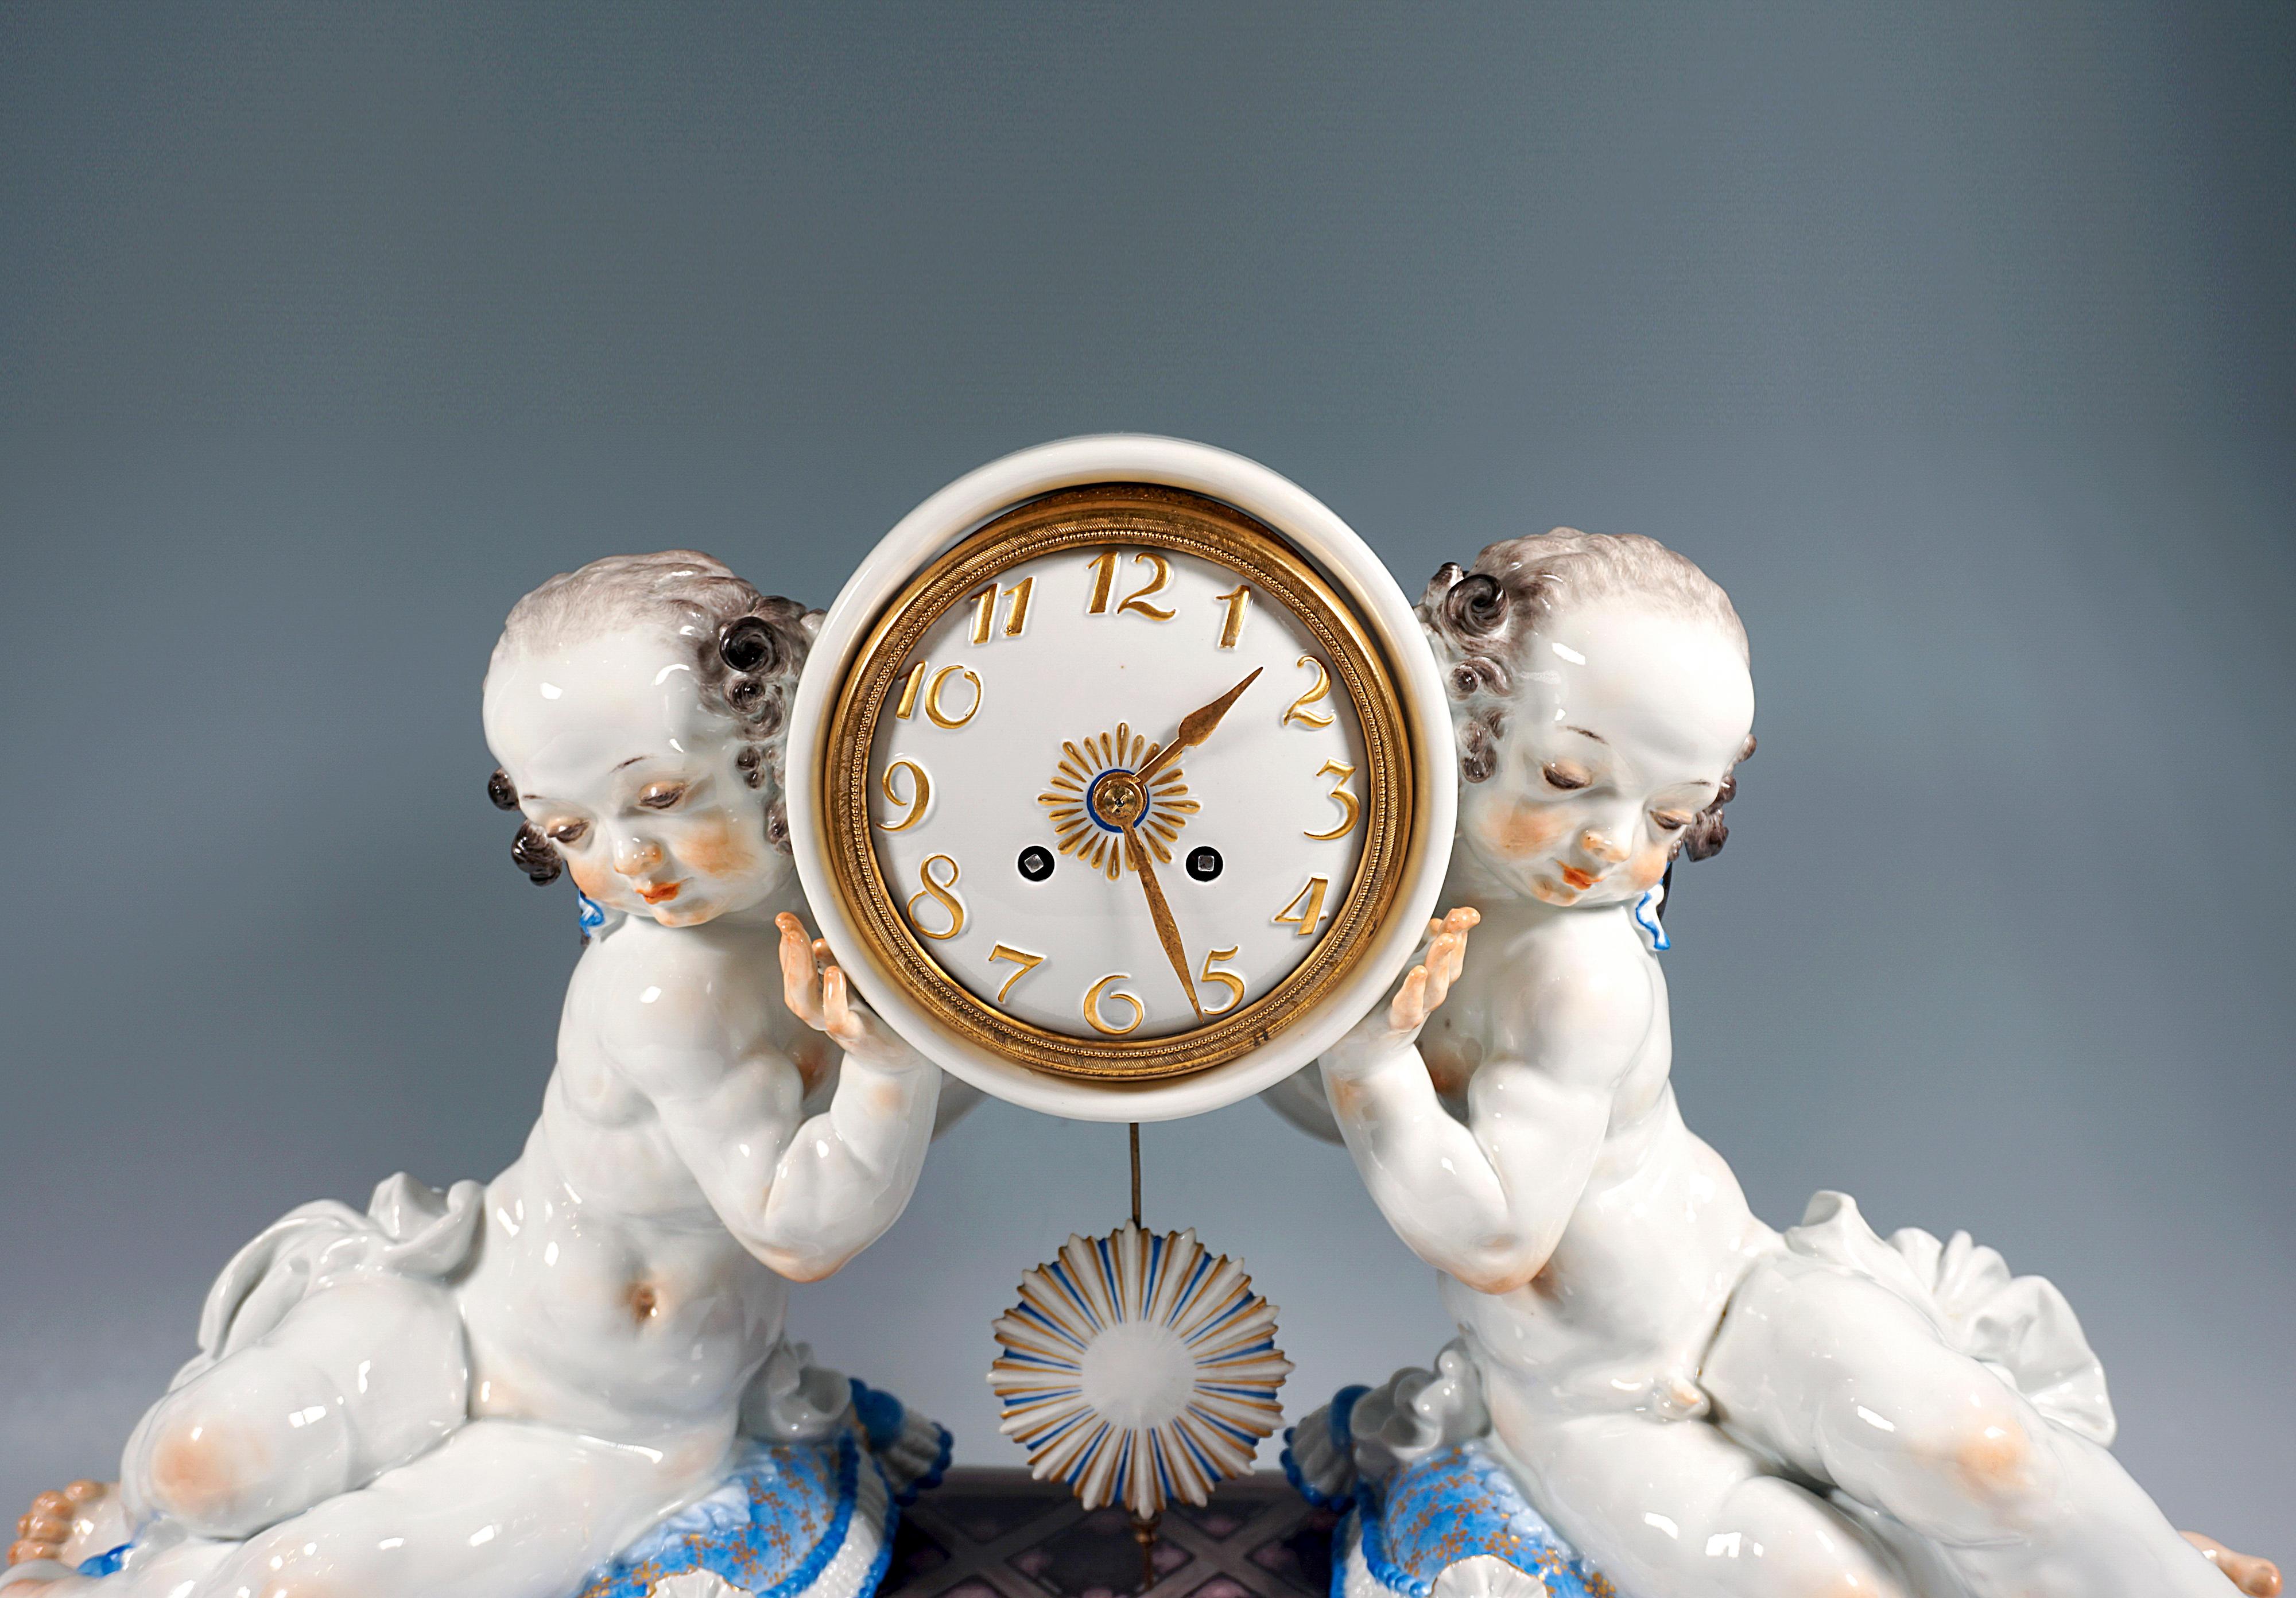 Rococo Revival Meissen Art Déco Mantle Clock with Two Putti by Paul Scheurich 1934-1947